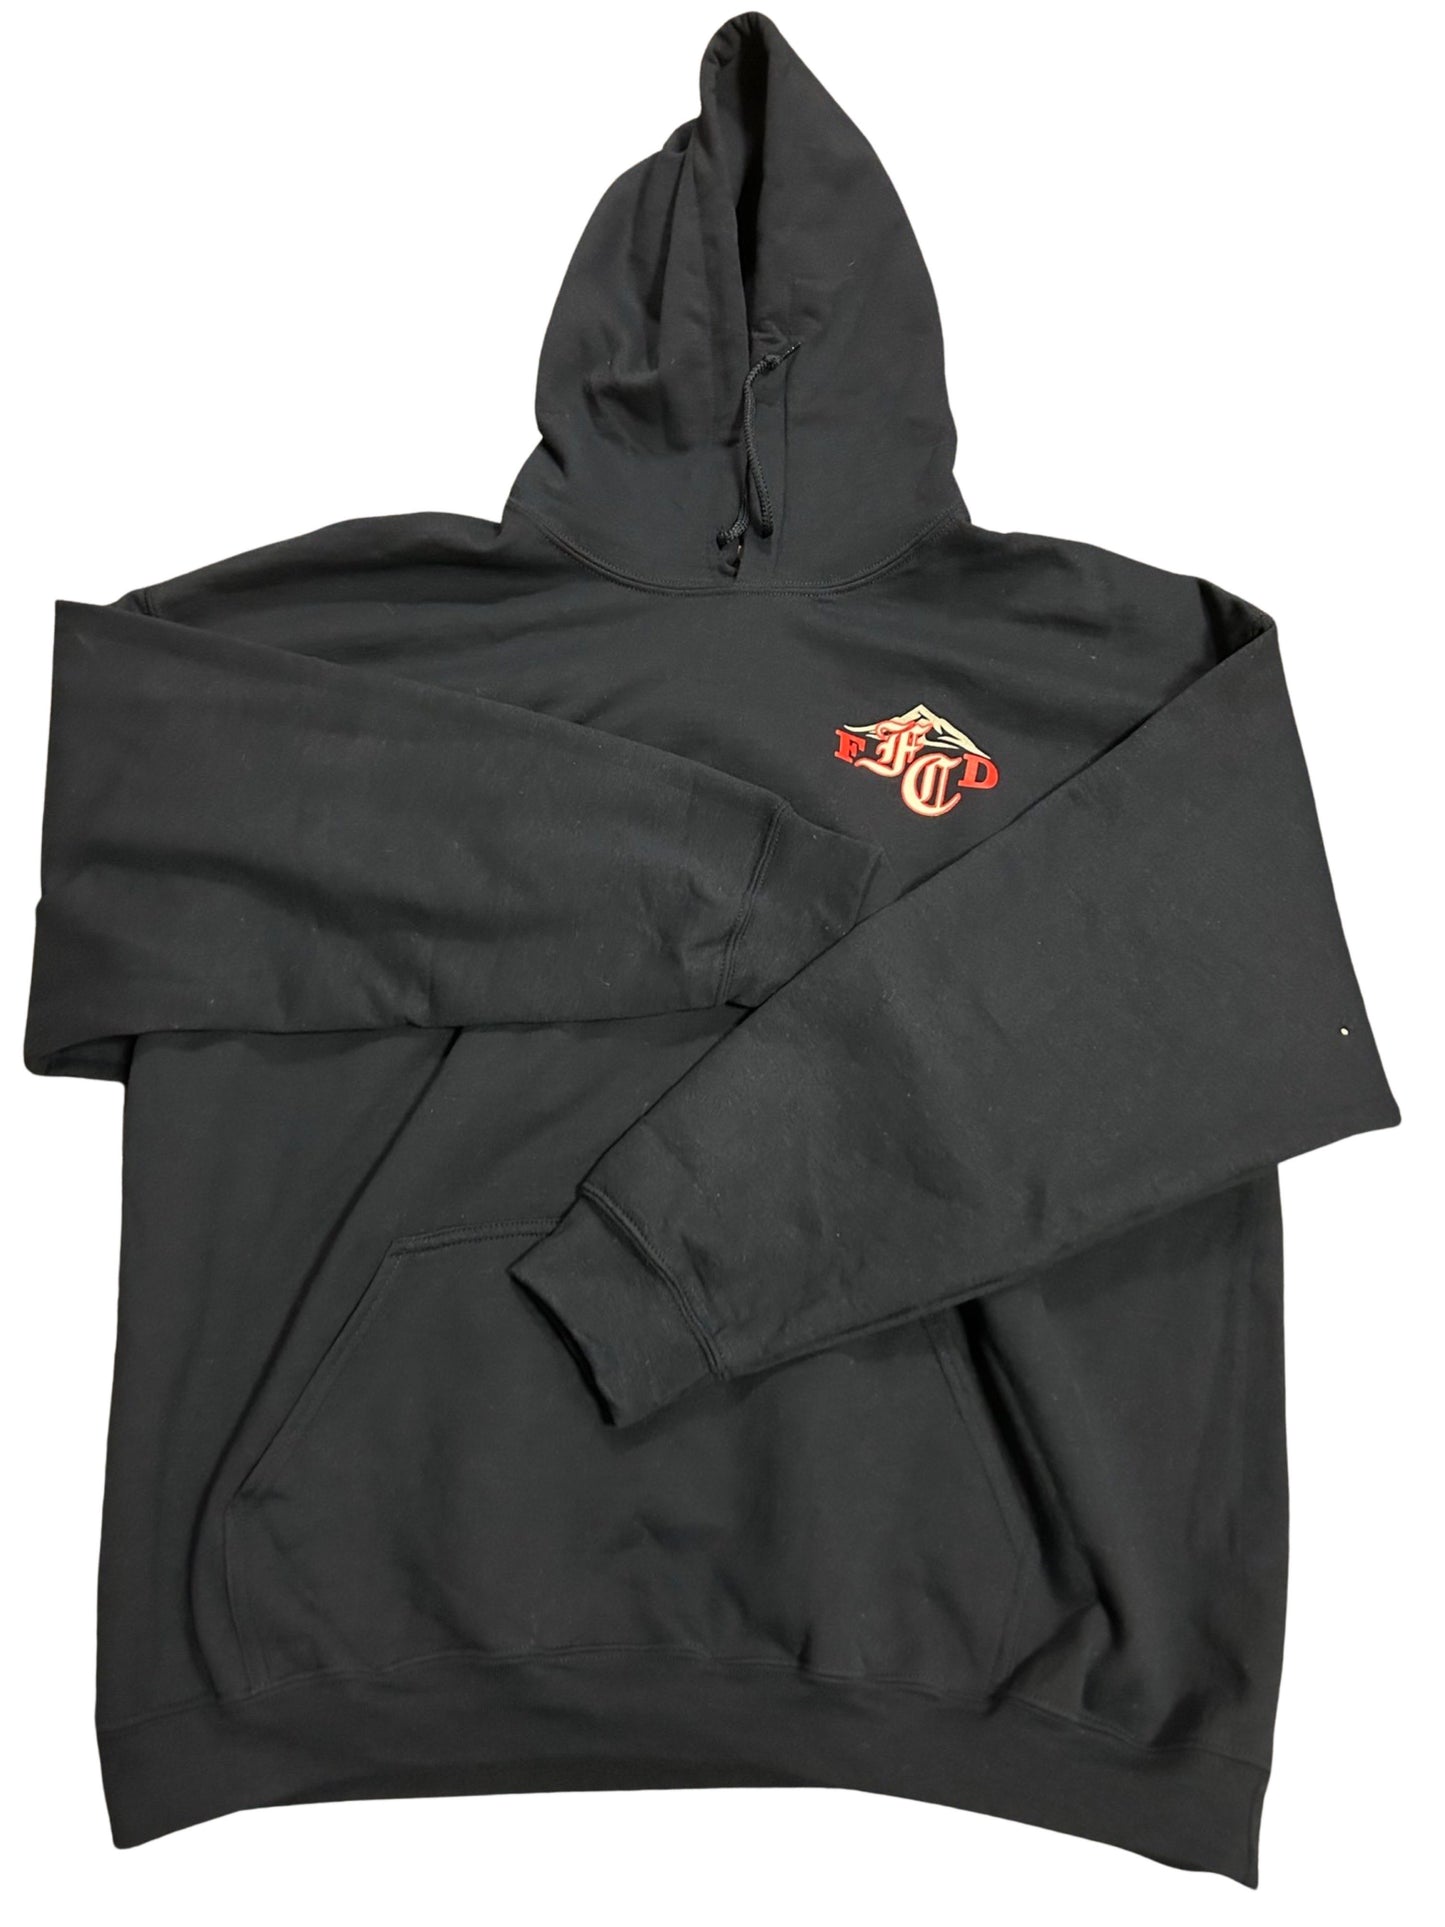 Carson Fire PT/Downtime Hoody (Mountain Logo)